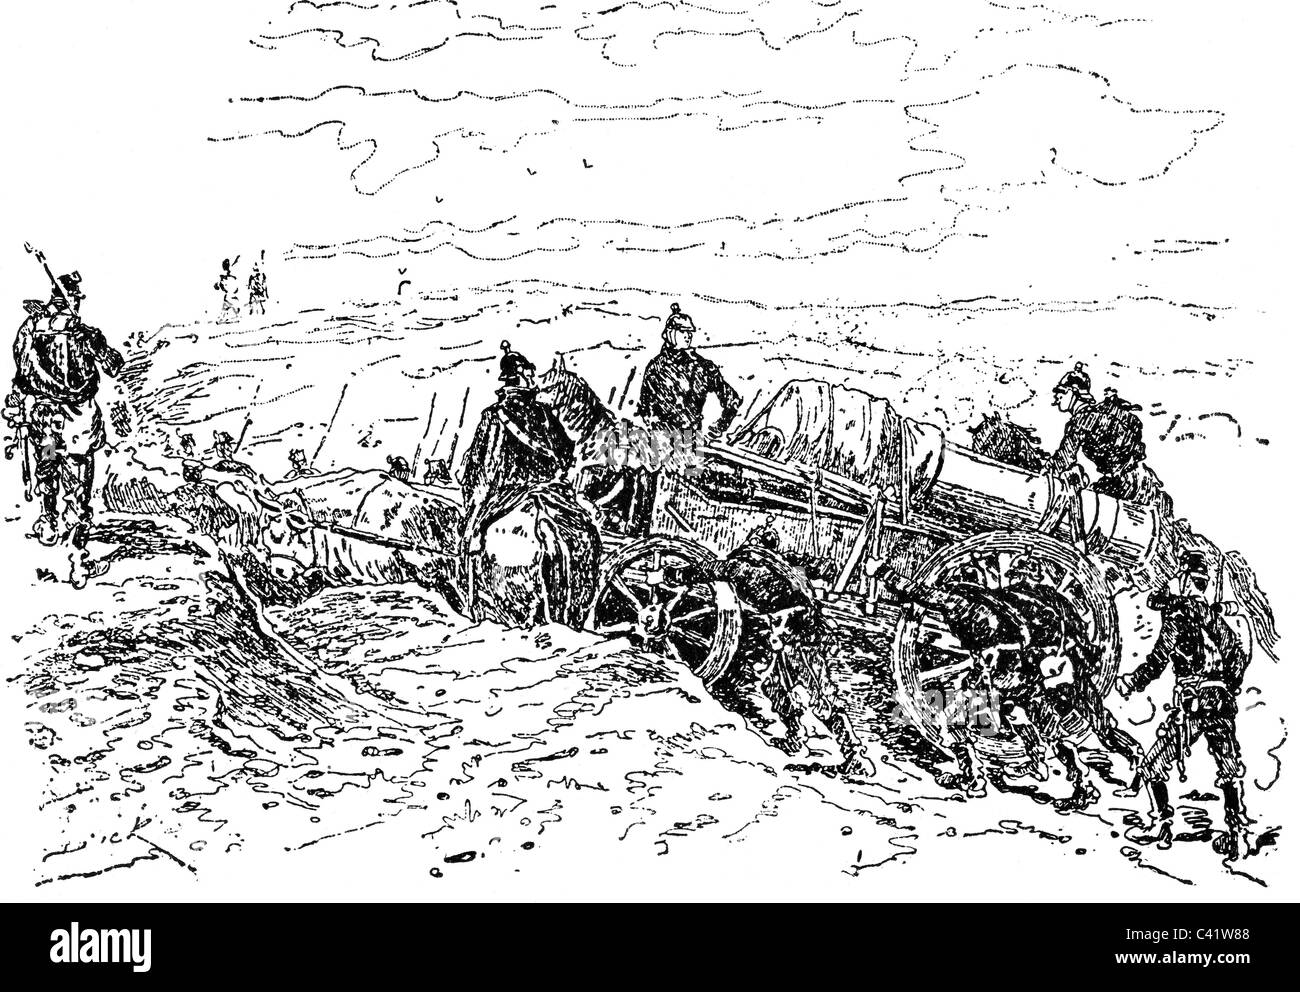 events, Franco-Prussian War 1870 - 1871, Siege of Metz 20.8.- 27.10.1870, transport of a German siege gun, wood engraving, late 19th century, heavy artillery, canon, pushing, hill, France, soldiers, Lorraine, Franco - Prussian, historic, historical, people, Additional-Rights-Clearences-Not Available Stock Photo